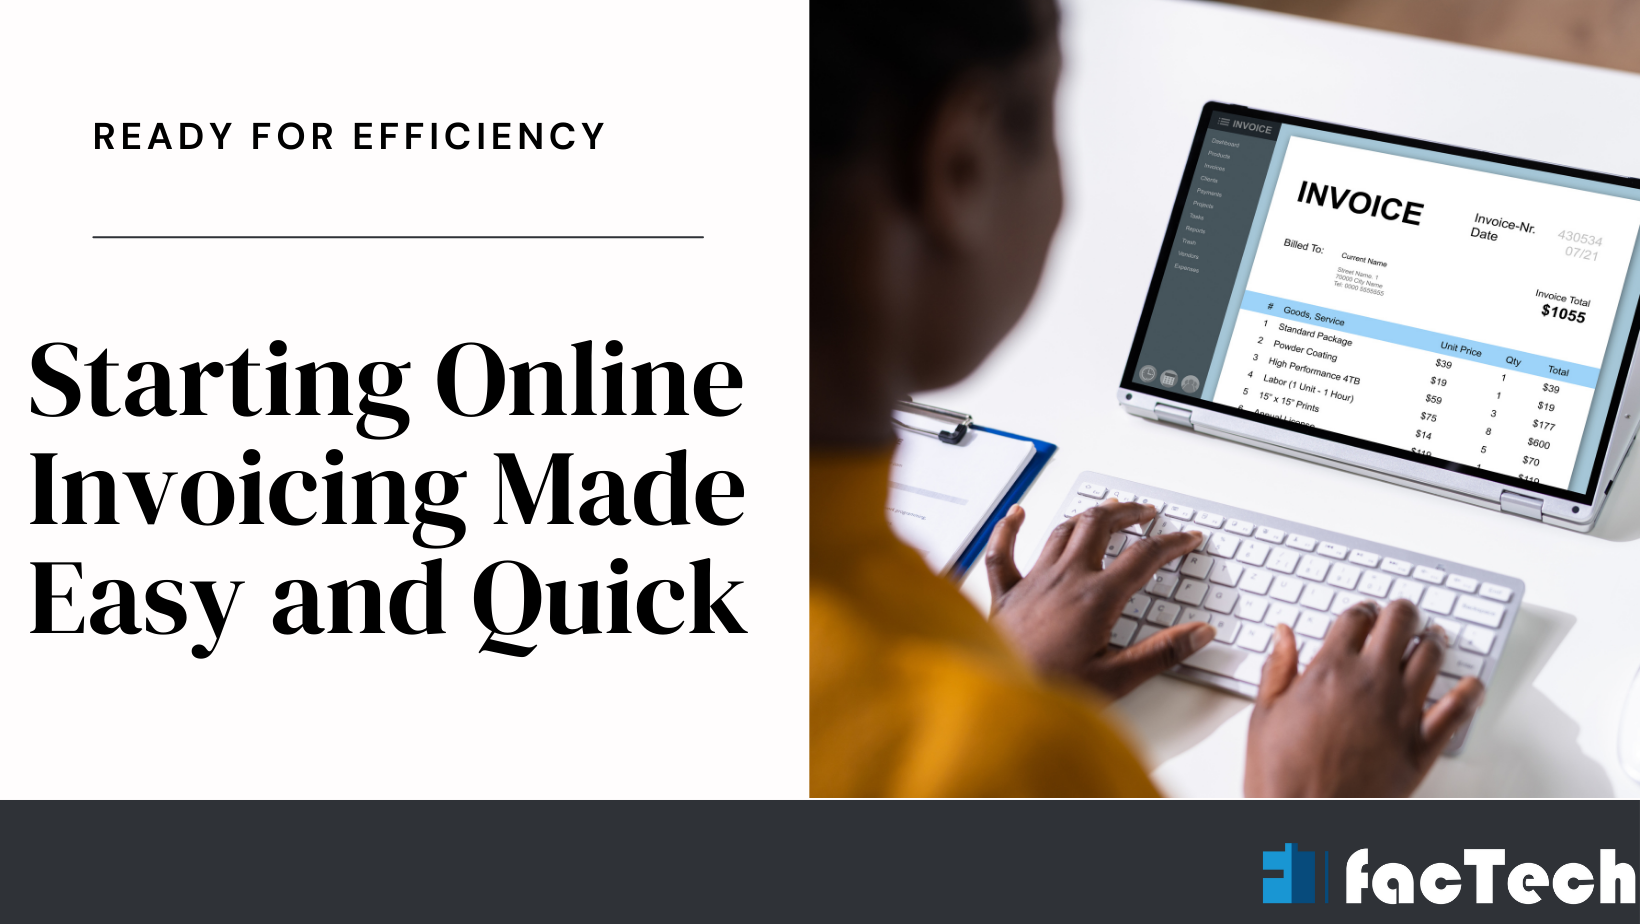 Starting Online Invoicing Made Easy and Quick